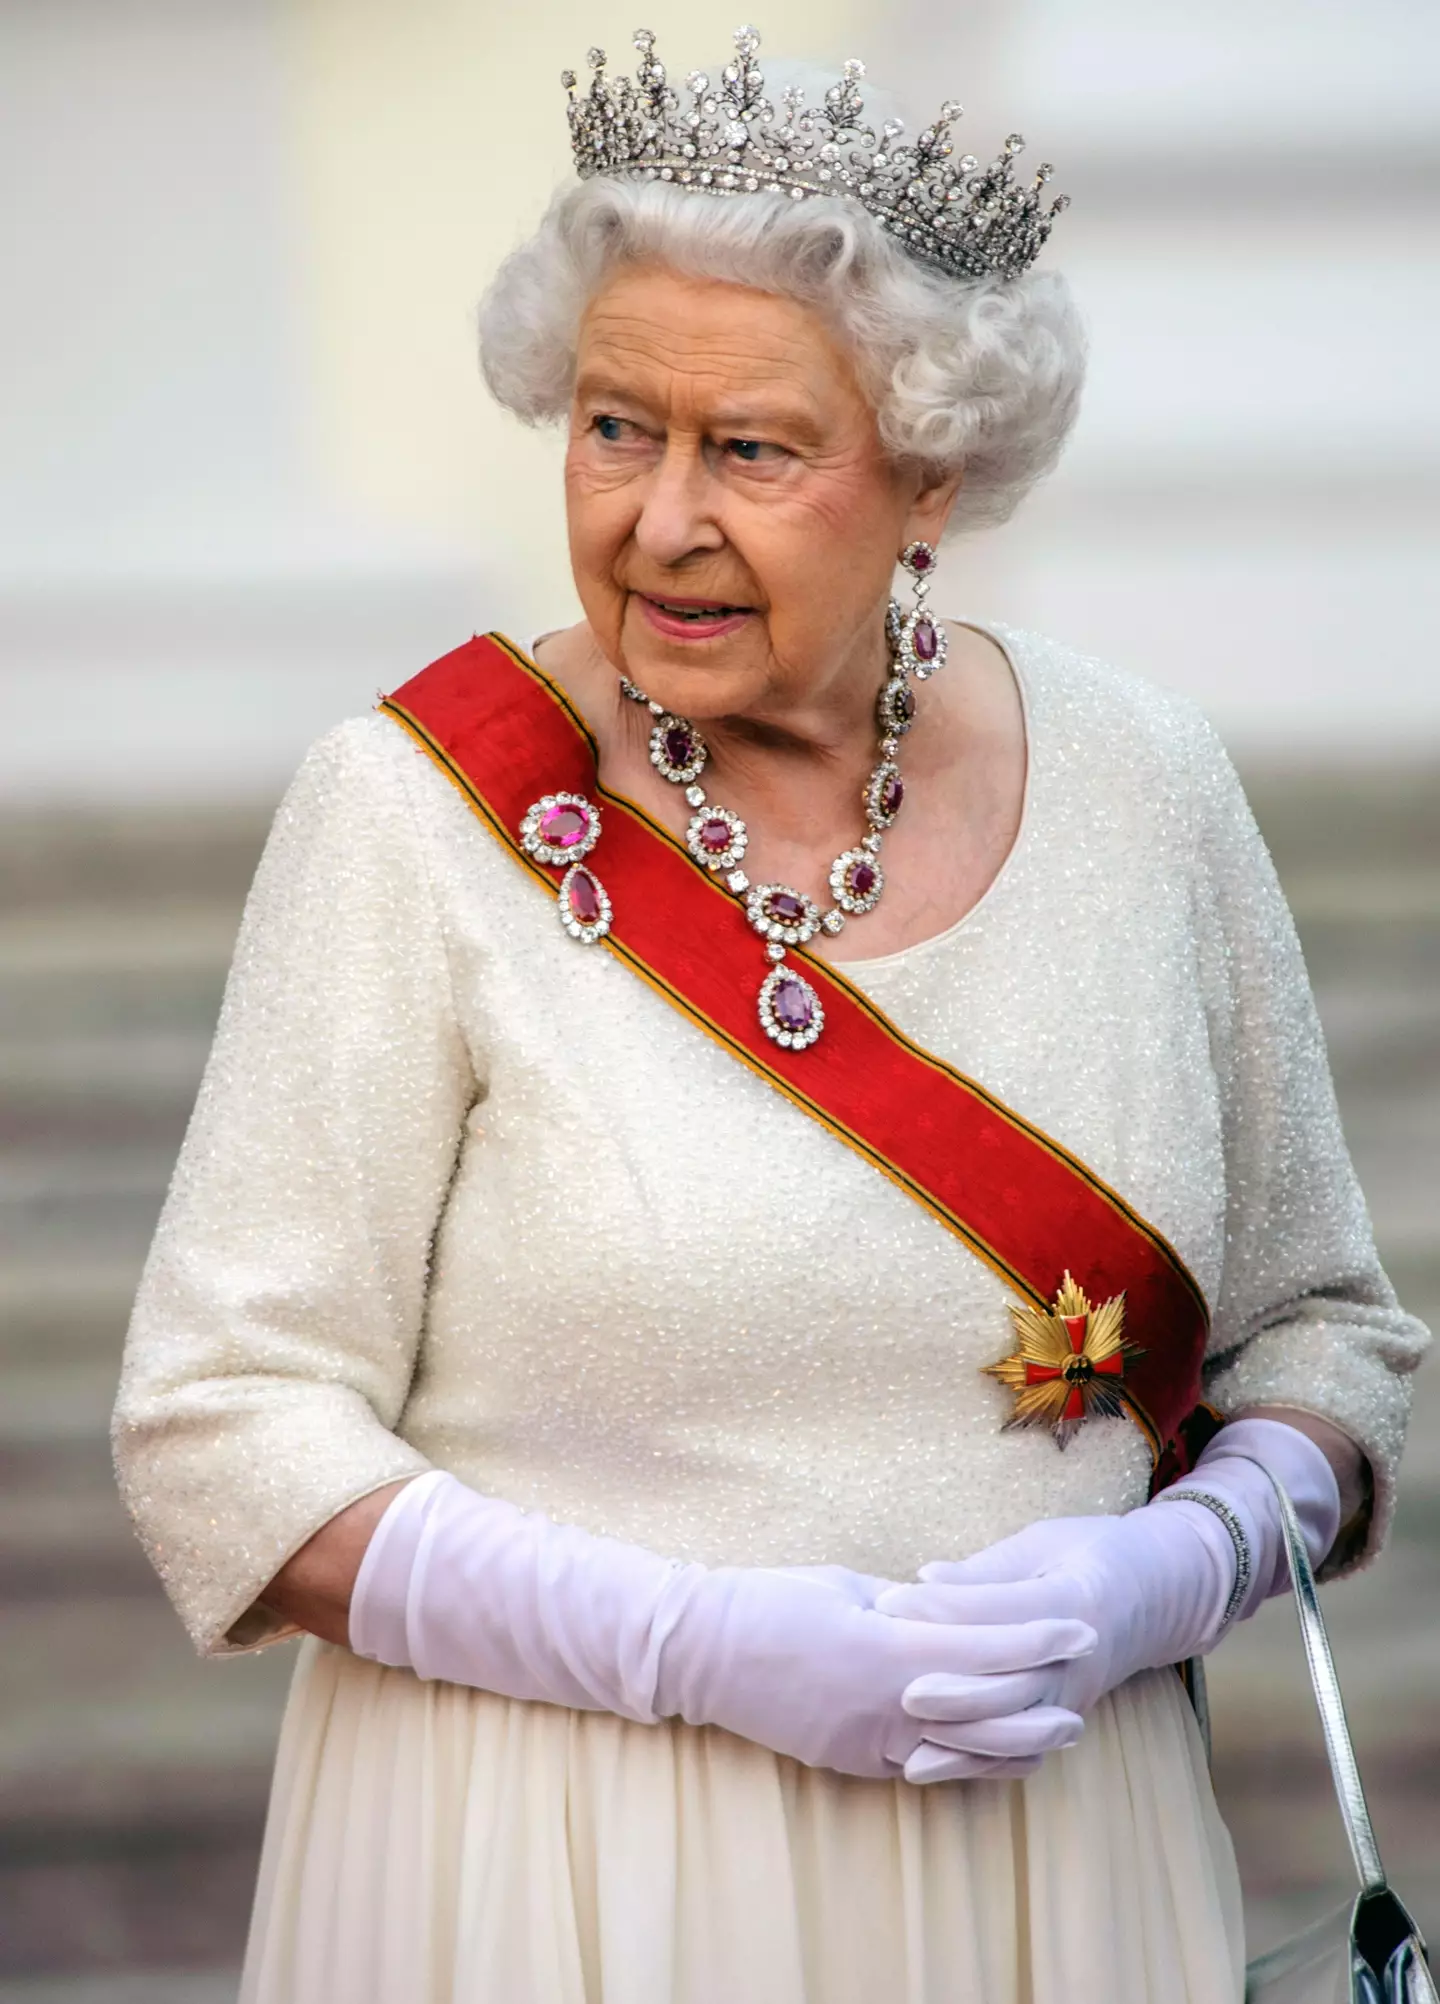 Hundreds of businesses must now change their branding following the death of the Queen.